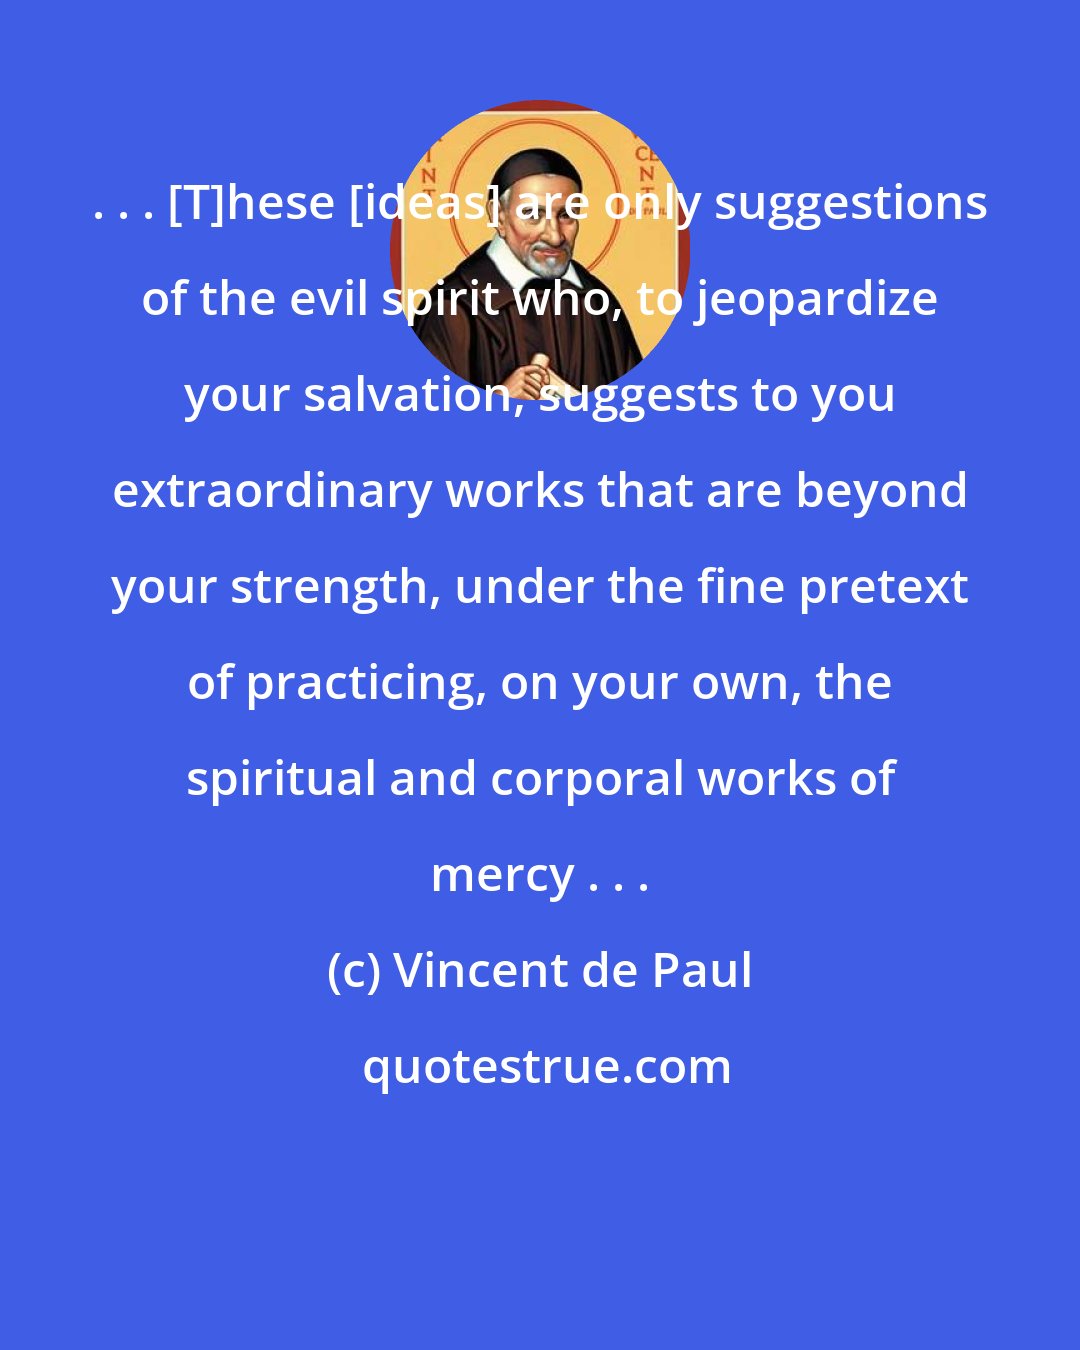 Vincent de Paul: . . . [T]hese [ideas] are only suggestions of the evil spirit who, to jeopardize your salvation, suggests to you extraordinary works that are beyond your strength, under the fine pretext of practicing, on your own, the spiritual and corporal works of mercy . . .